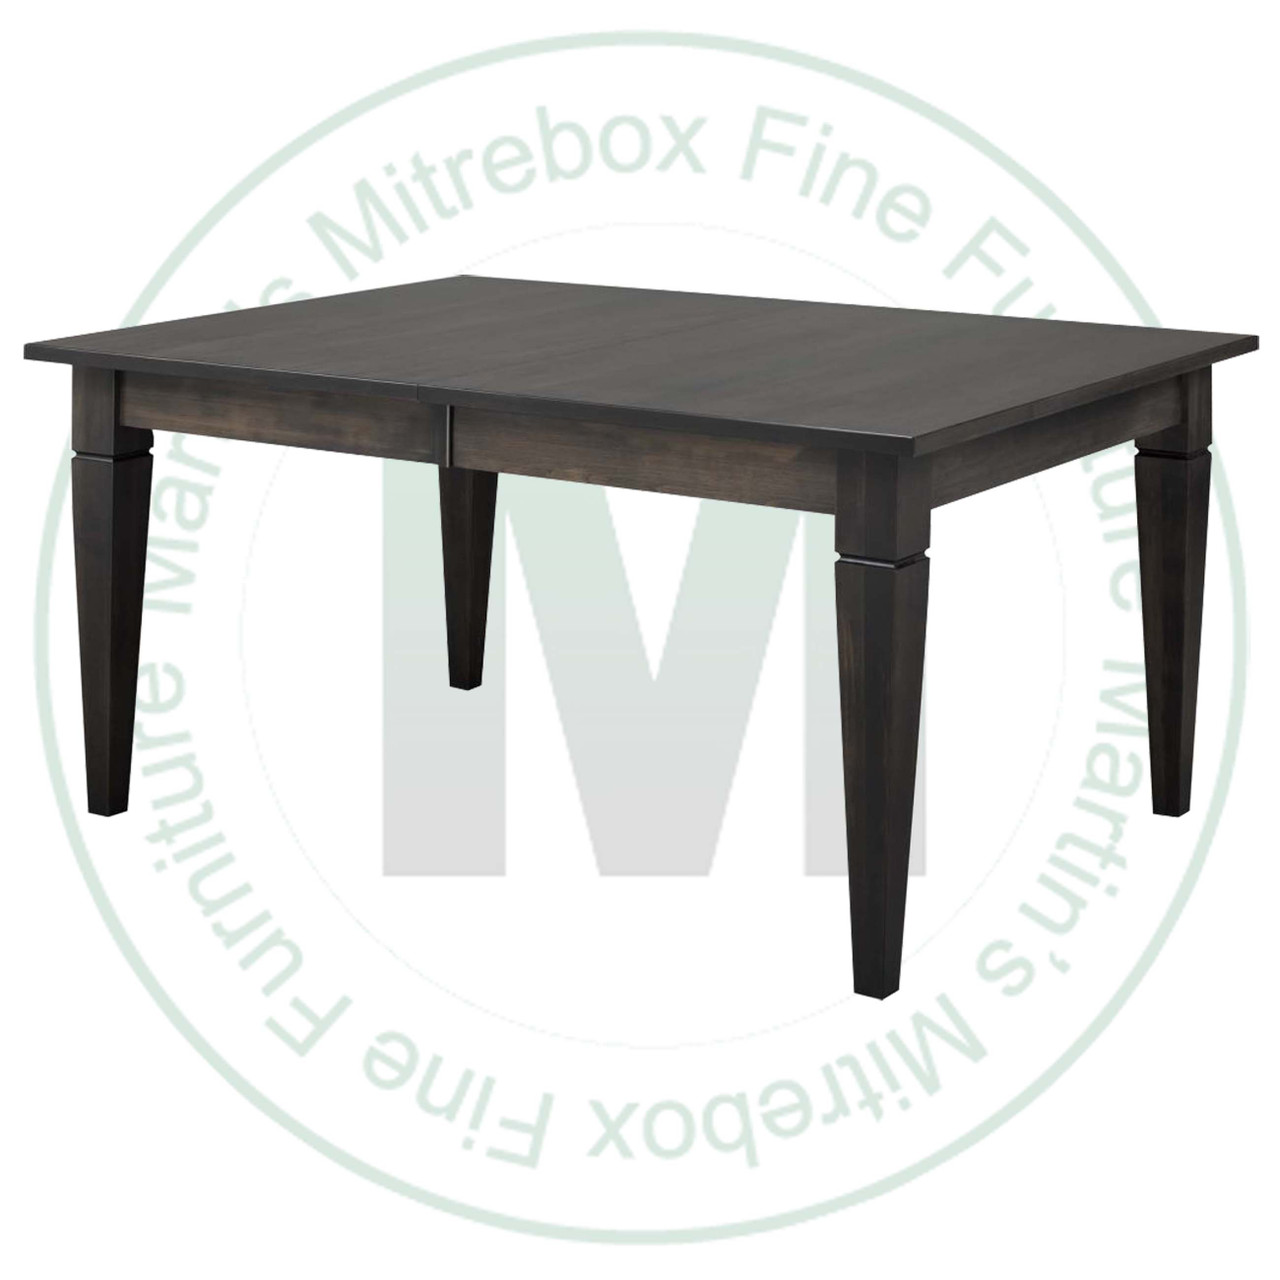 Wormy Maple Reesor Solid Top Harvest Table 36''D x 72''W x 30''H Table Has 1.25'' Thick Top And 2 - 16'' Extensions